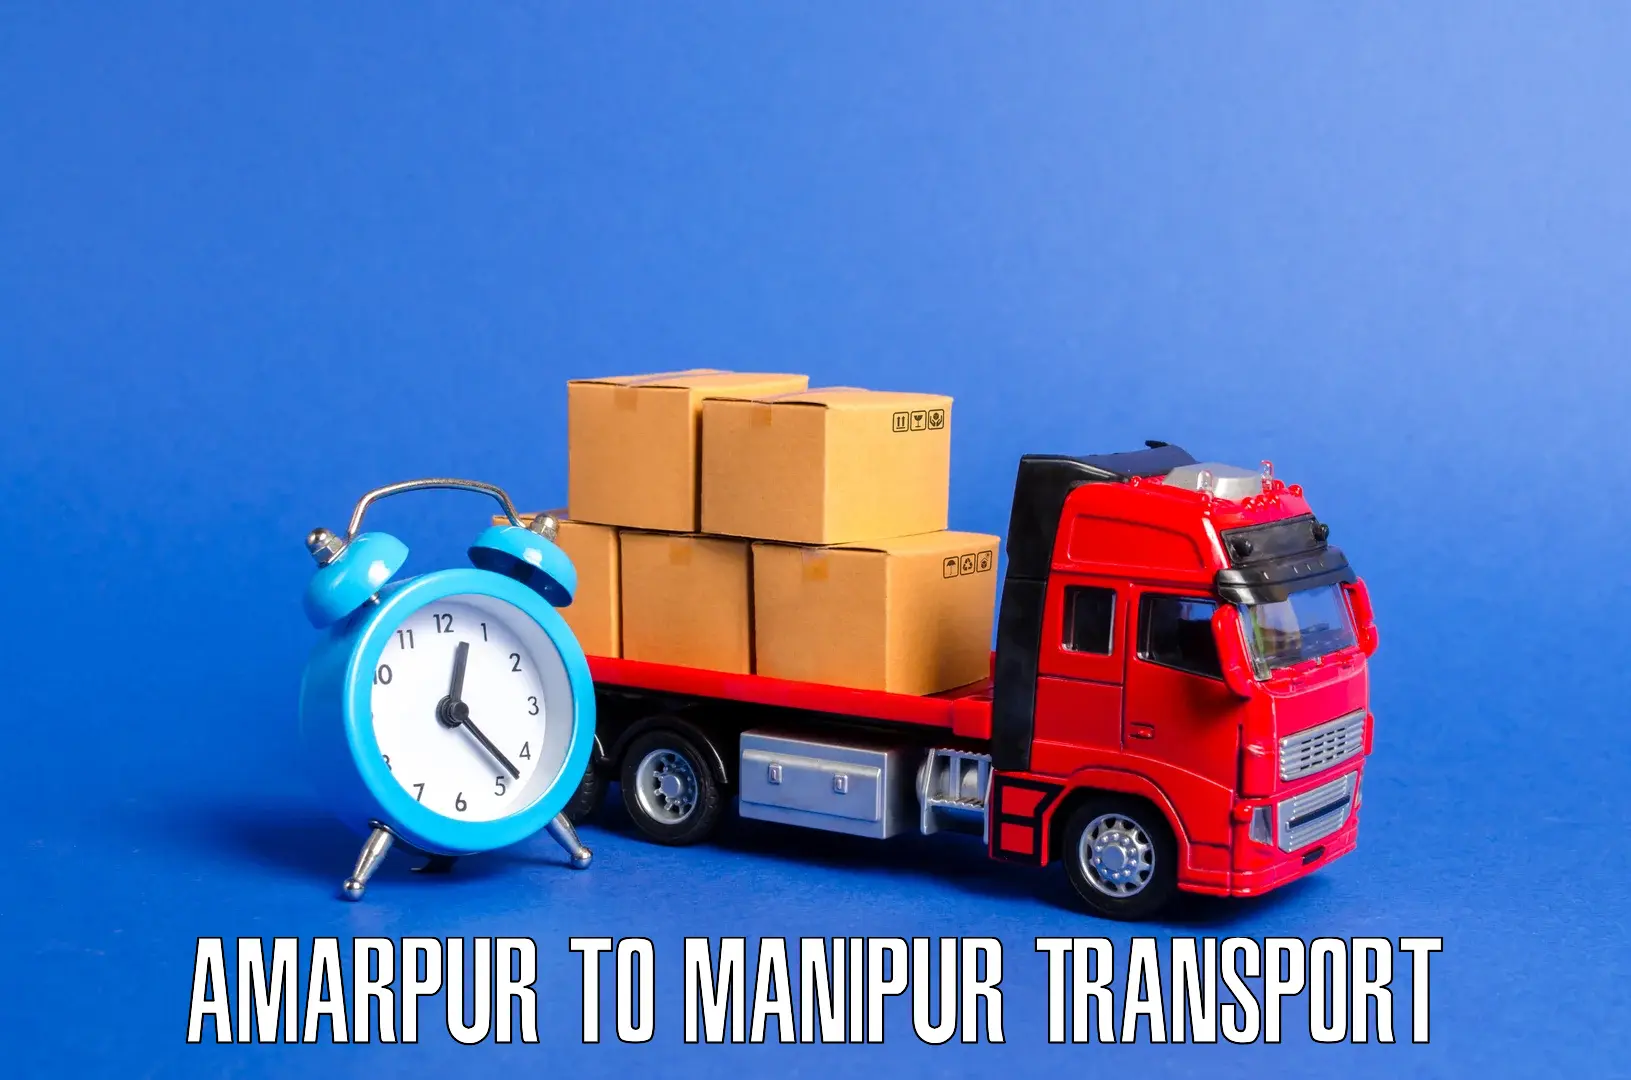 Delivery service Amarpur to Moirang